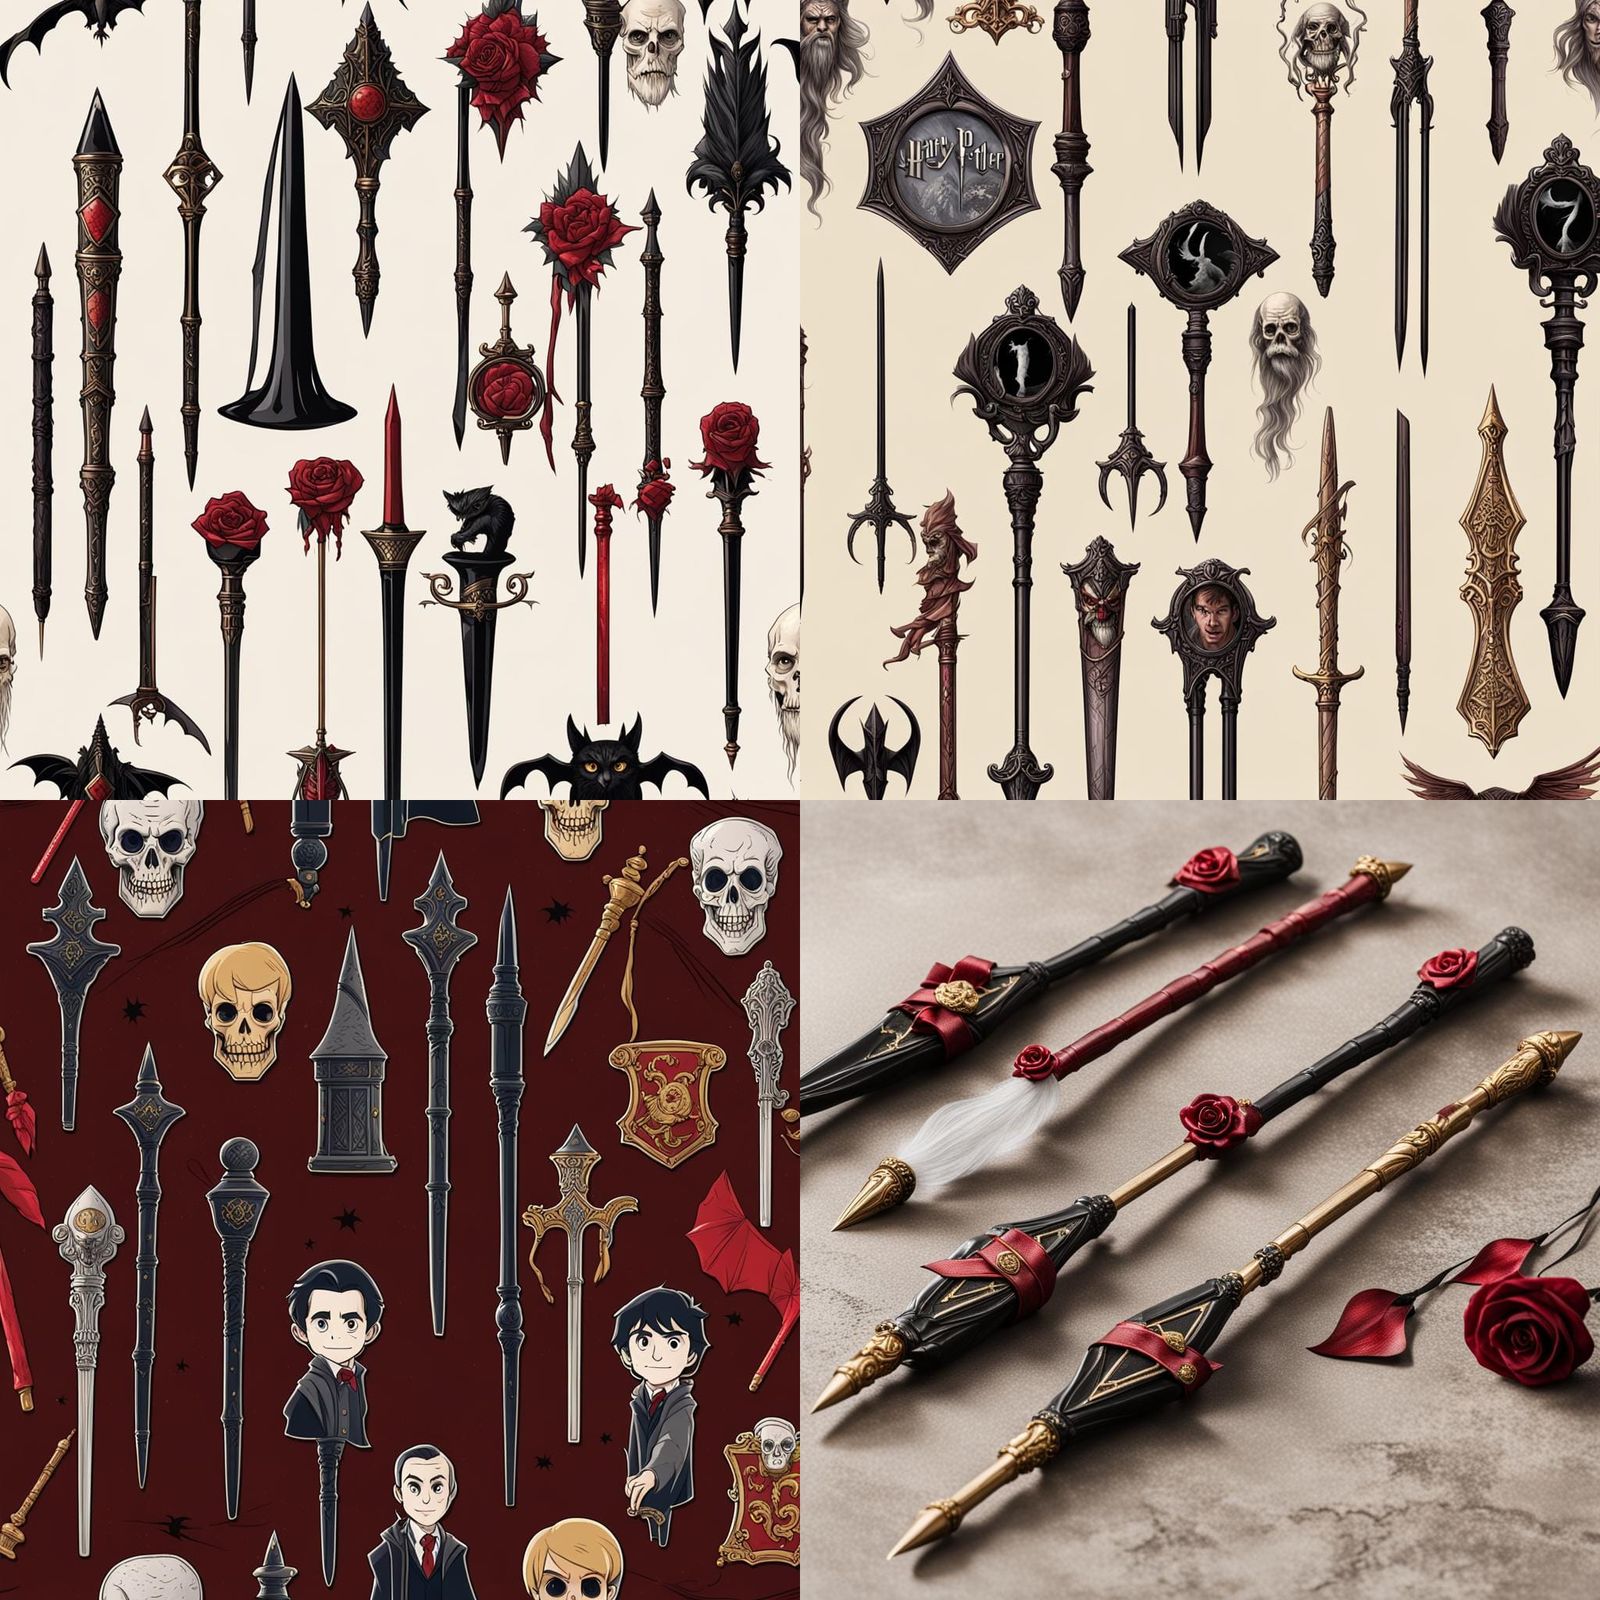 Harry potter wands with a vampire theme 